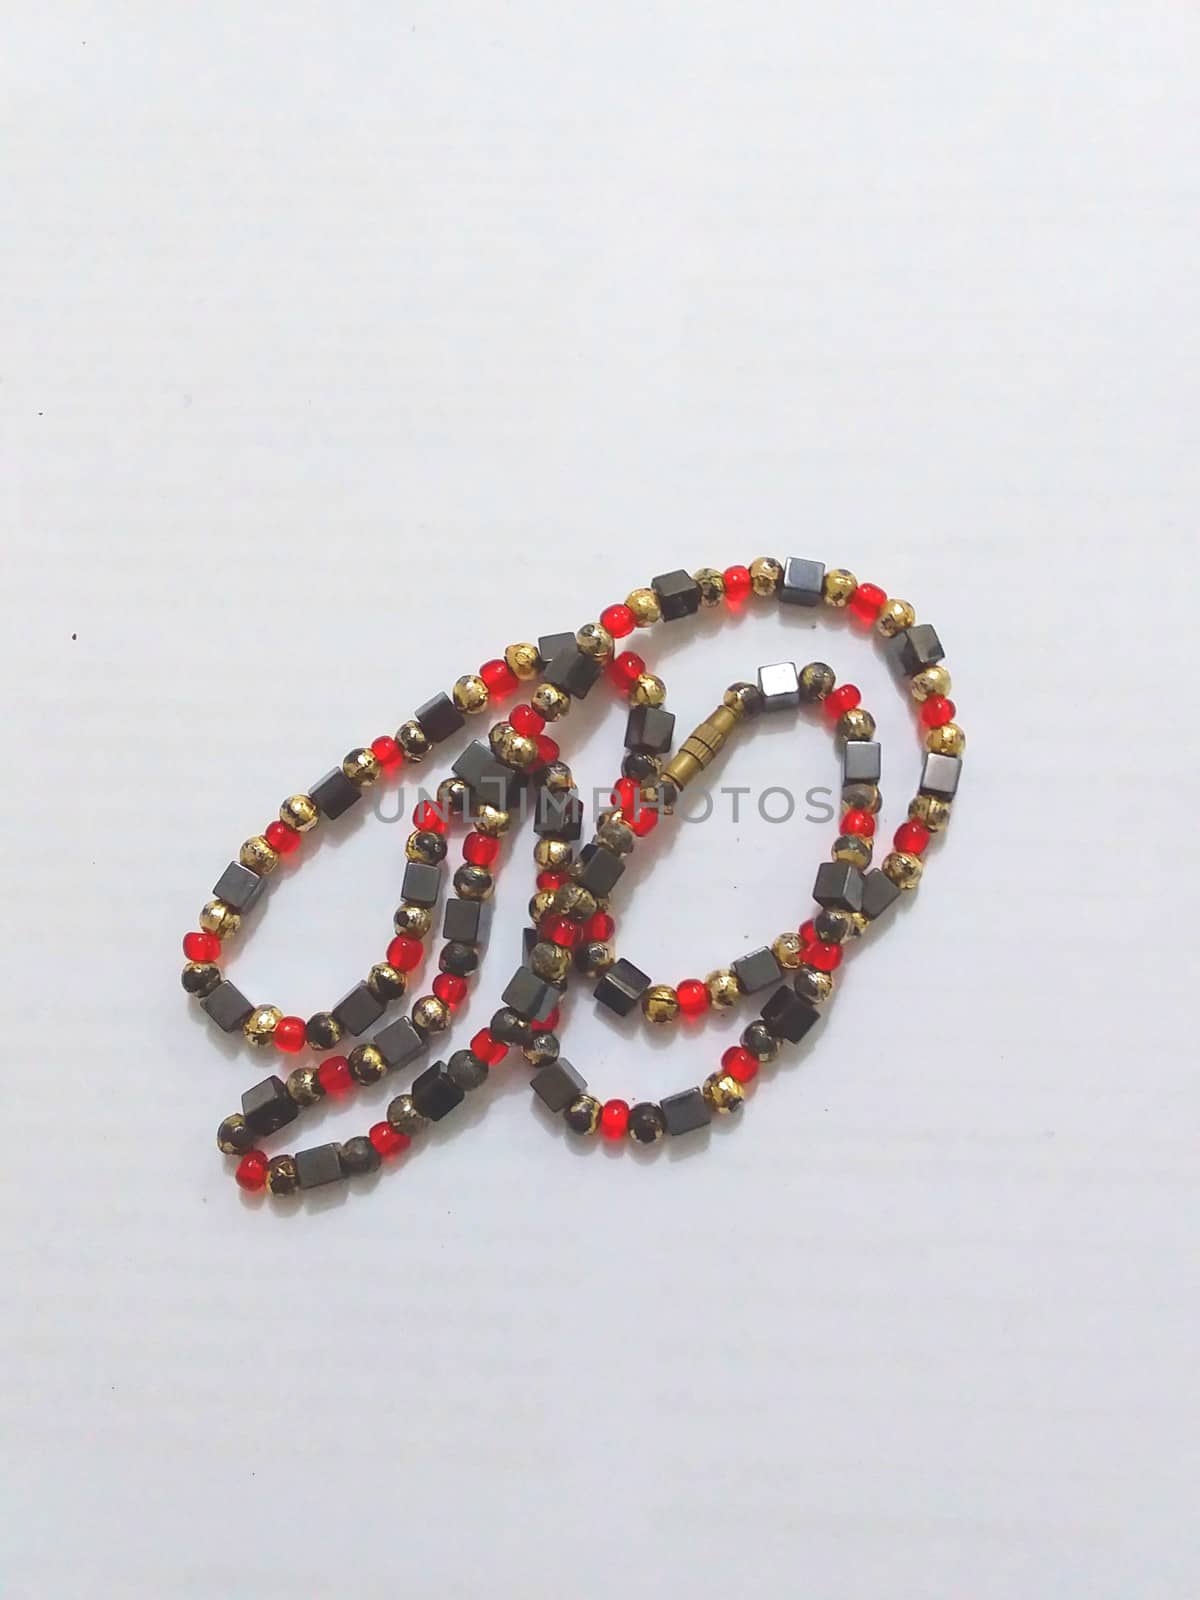 a necklace with red and green beads